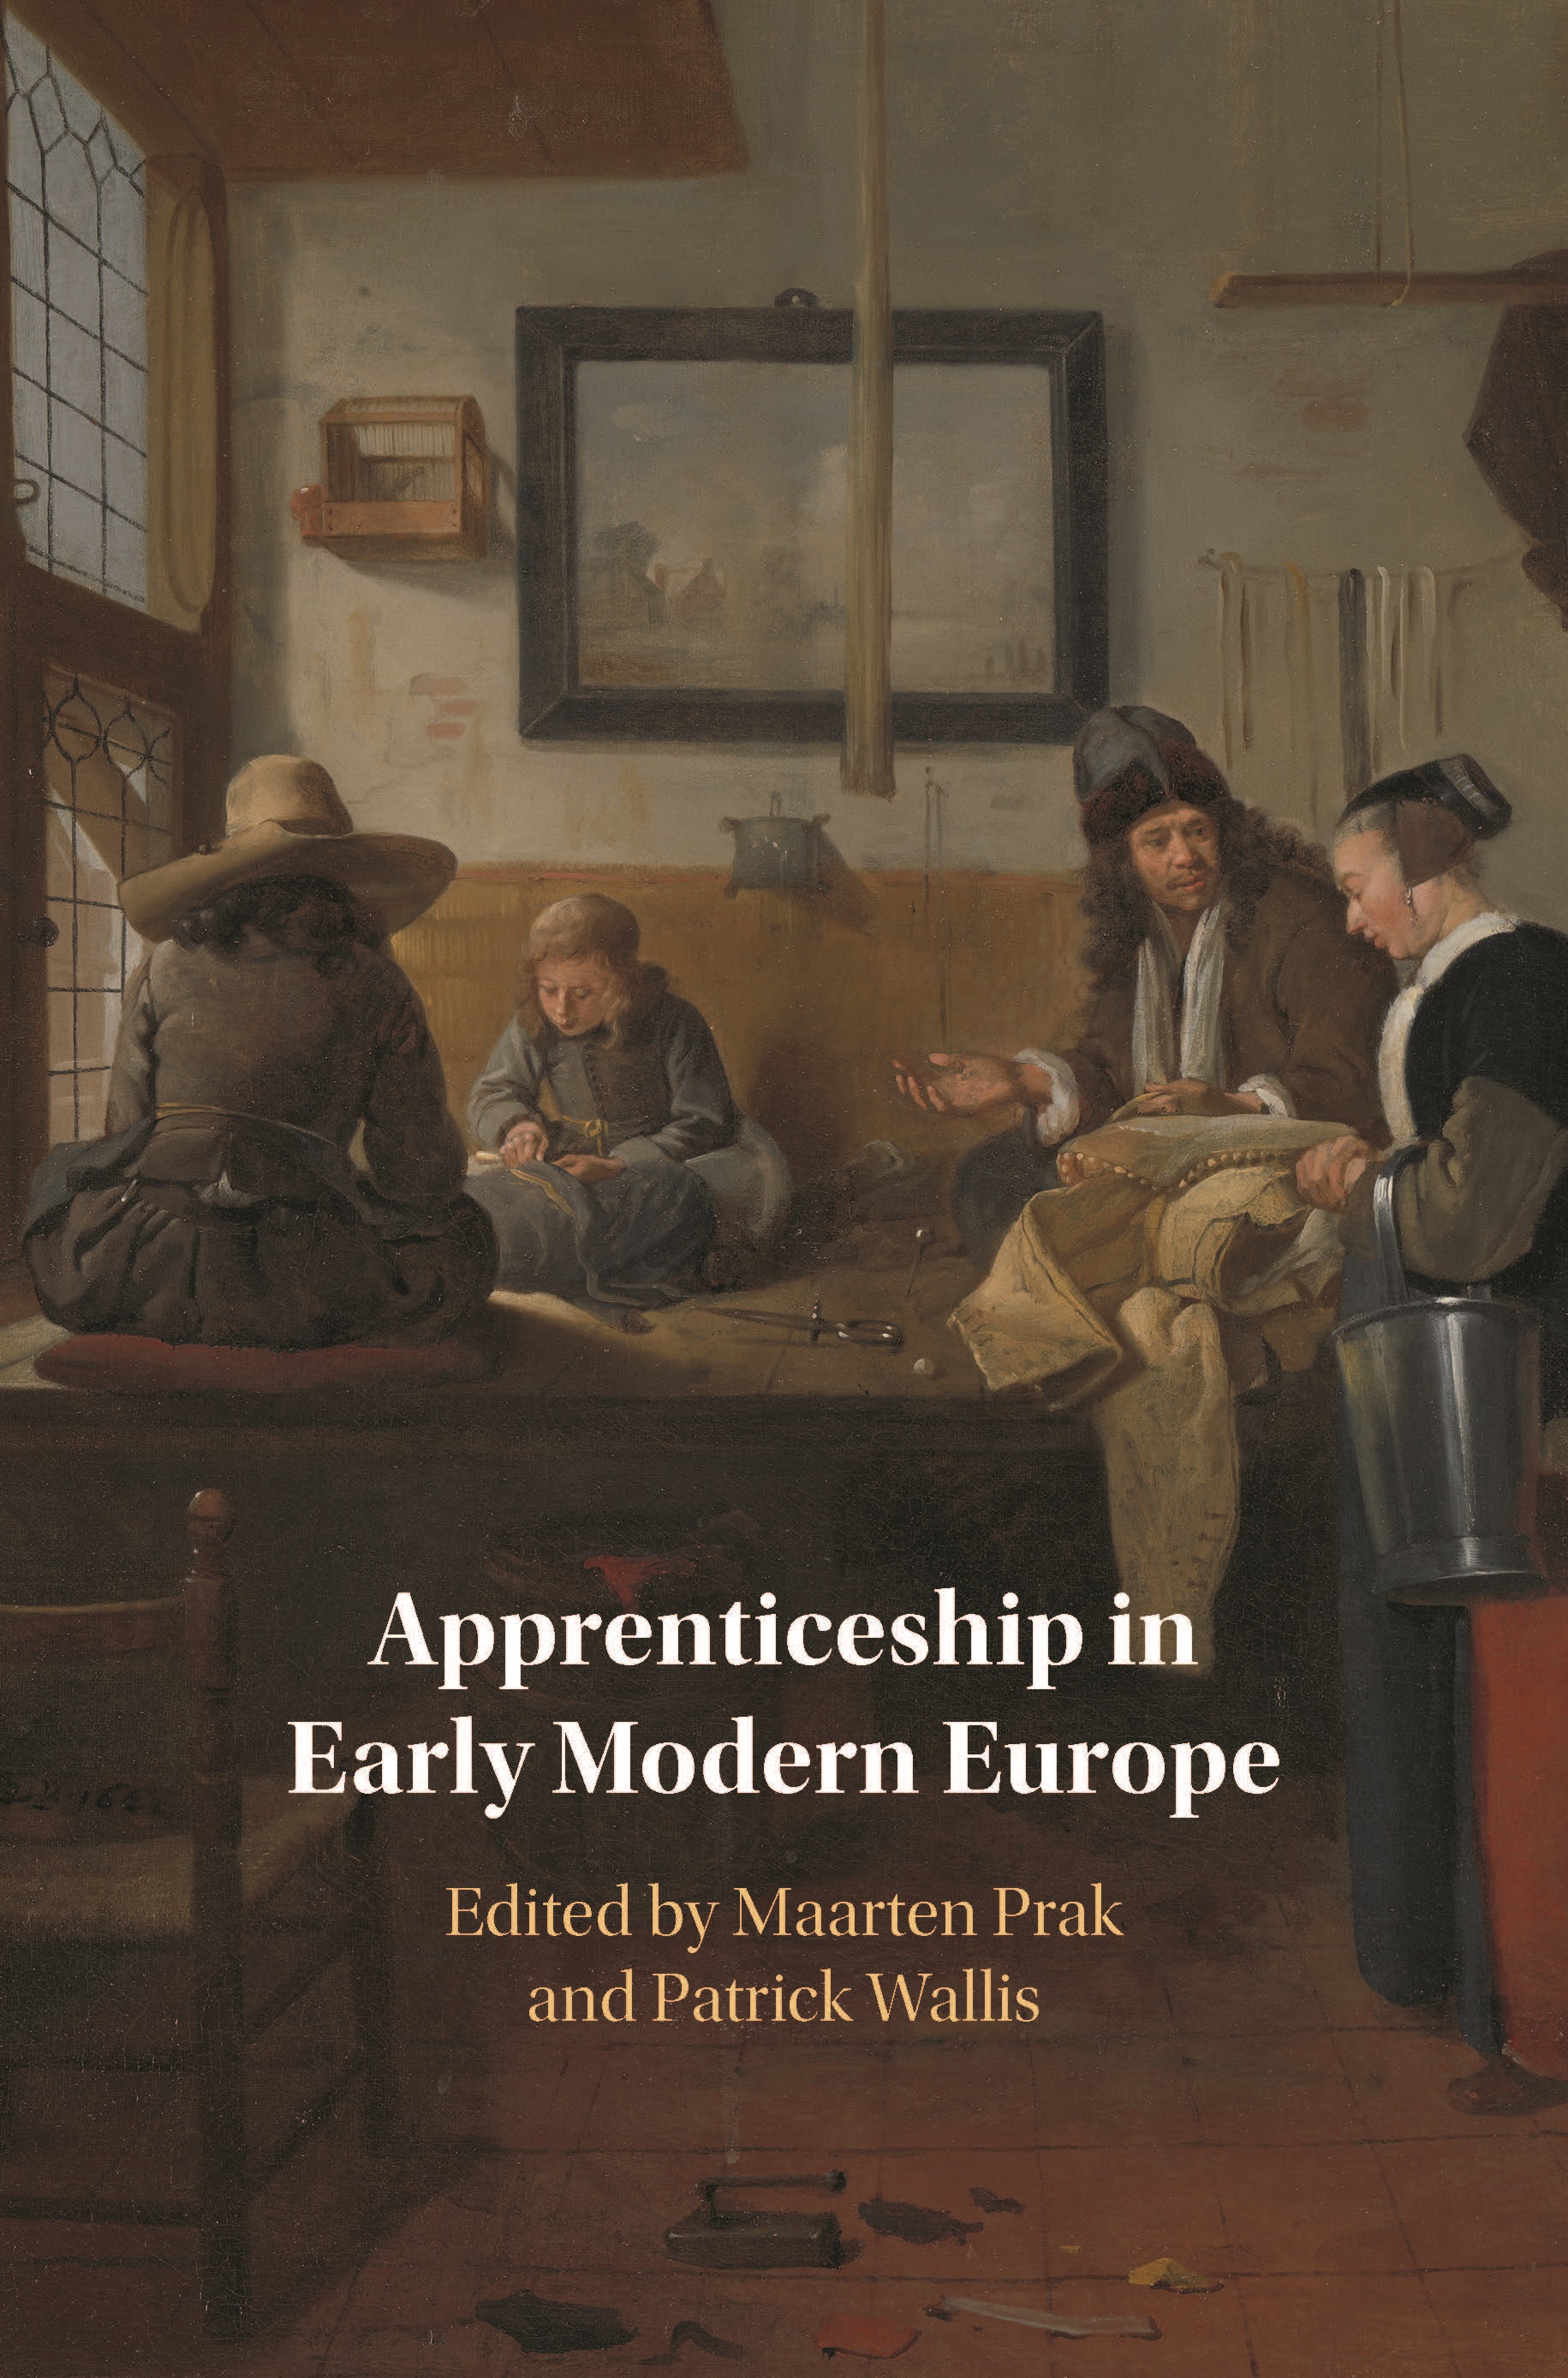 Apprenticeship in Early Modern Europe_Cover (002)